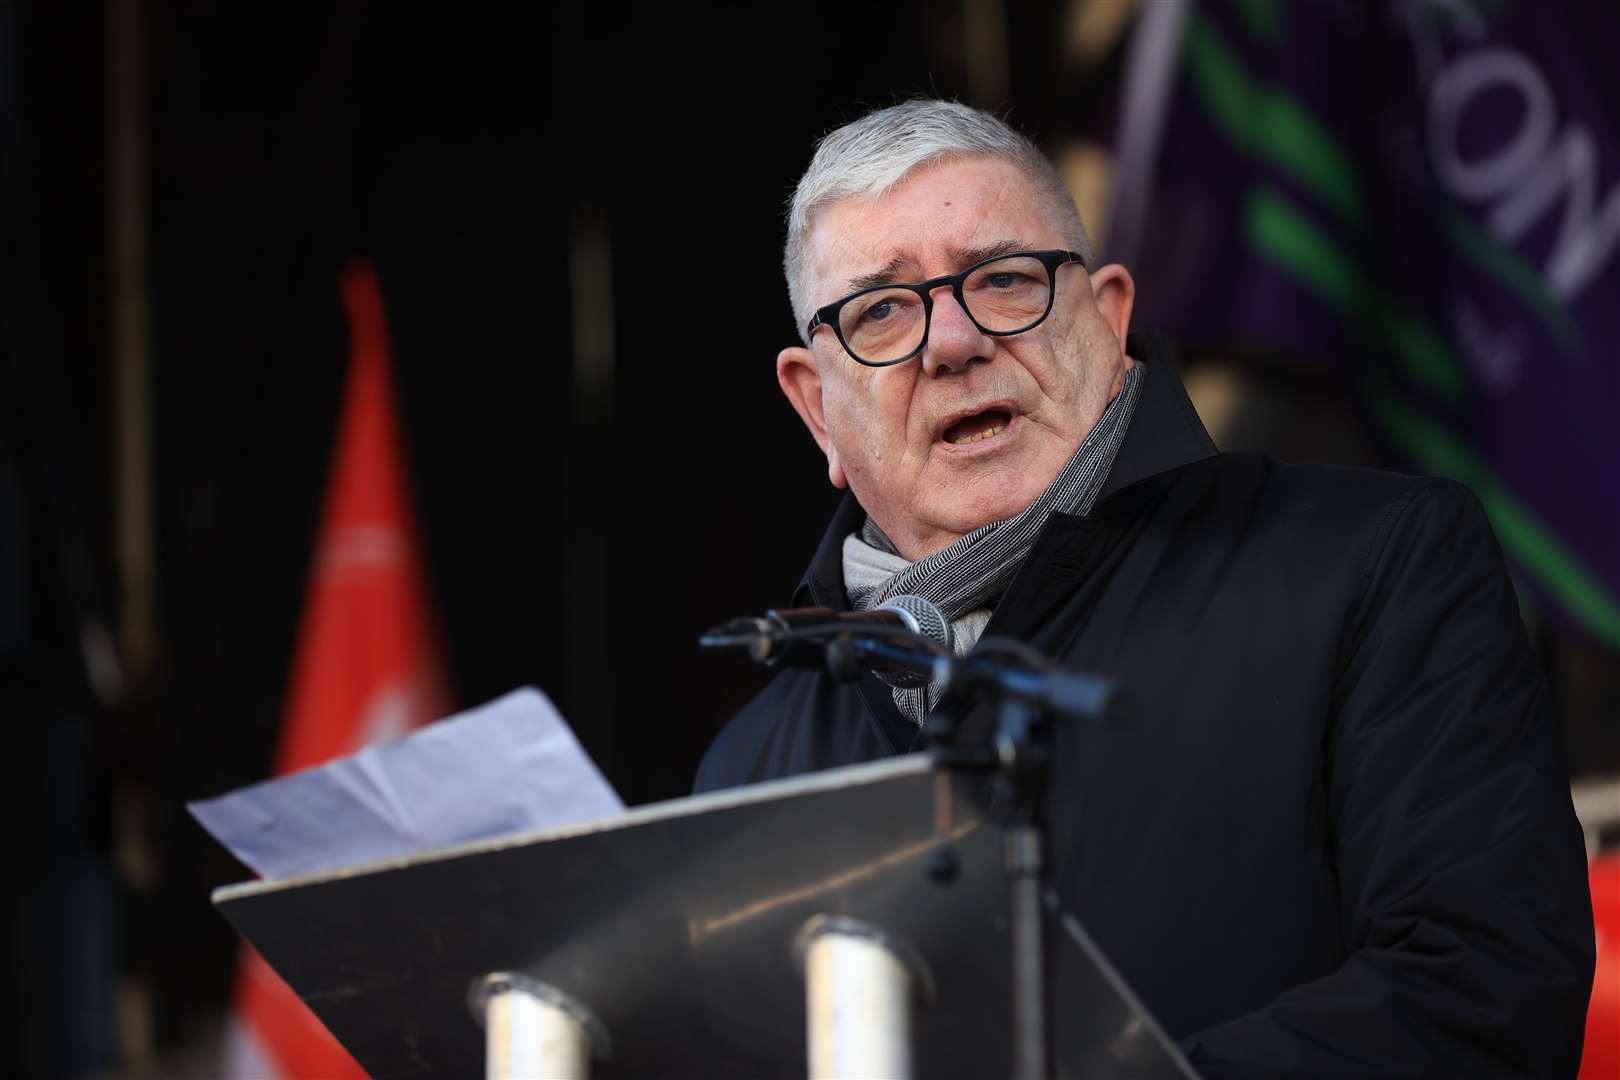 Gerry Murphy, assistant general secretary of the Irish Congress of Trade Unions, addresses union members outside Belfast City Hall (Liam McBurney/PA)